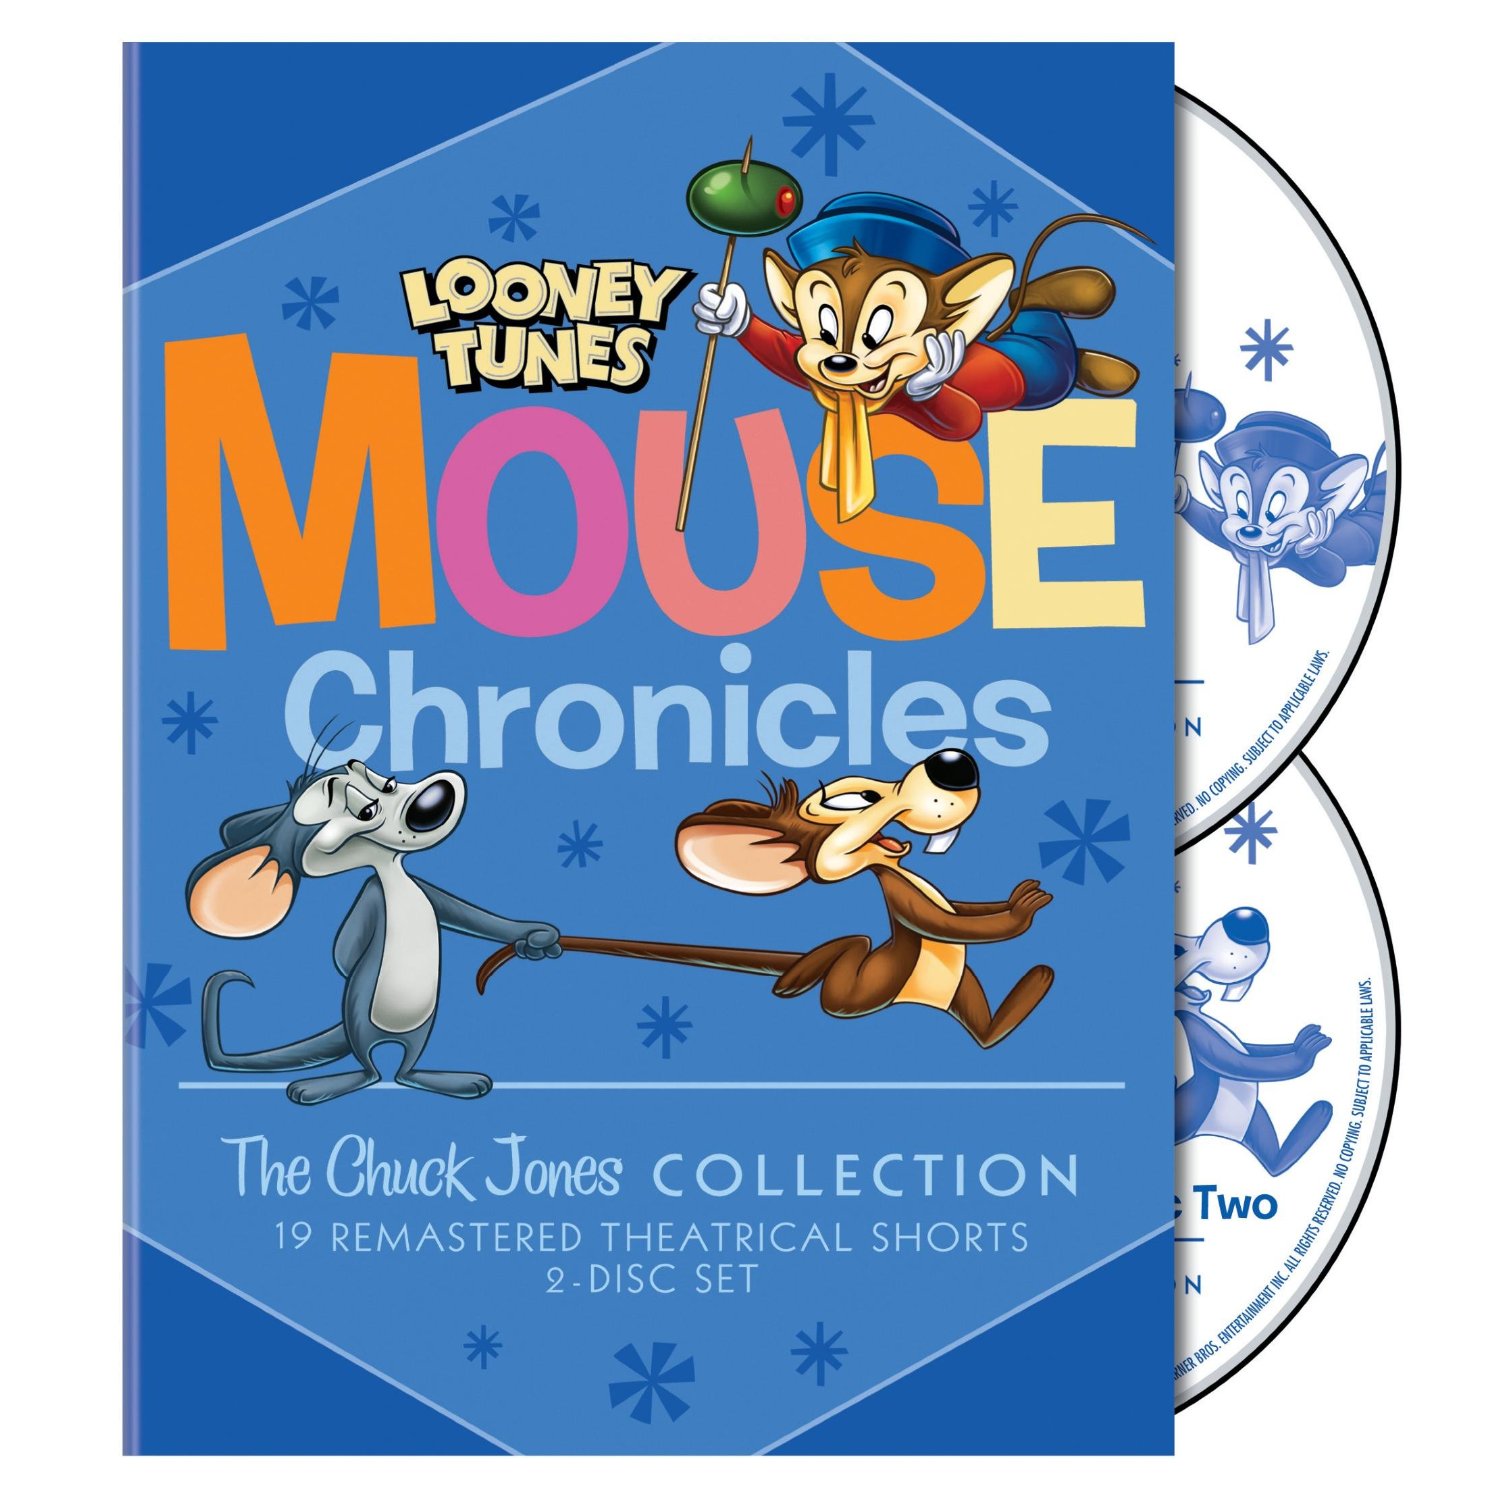 Looney Tunes, Newly Remastered Restored Cartoons Compilation, Bugs Bunny, Daffy Duck